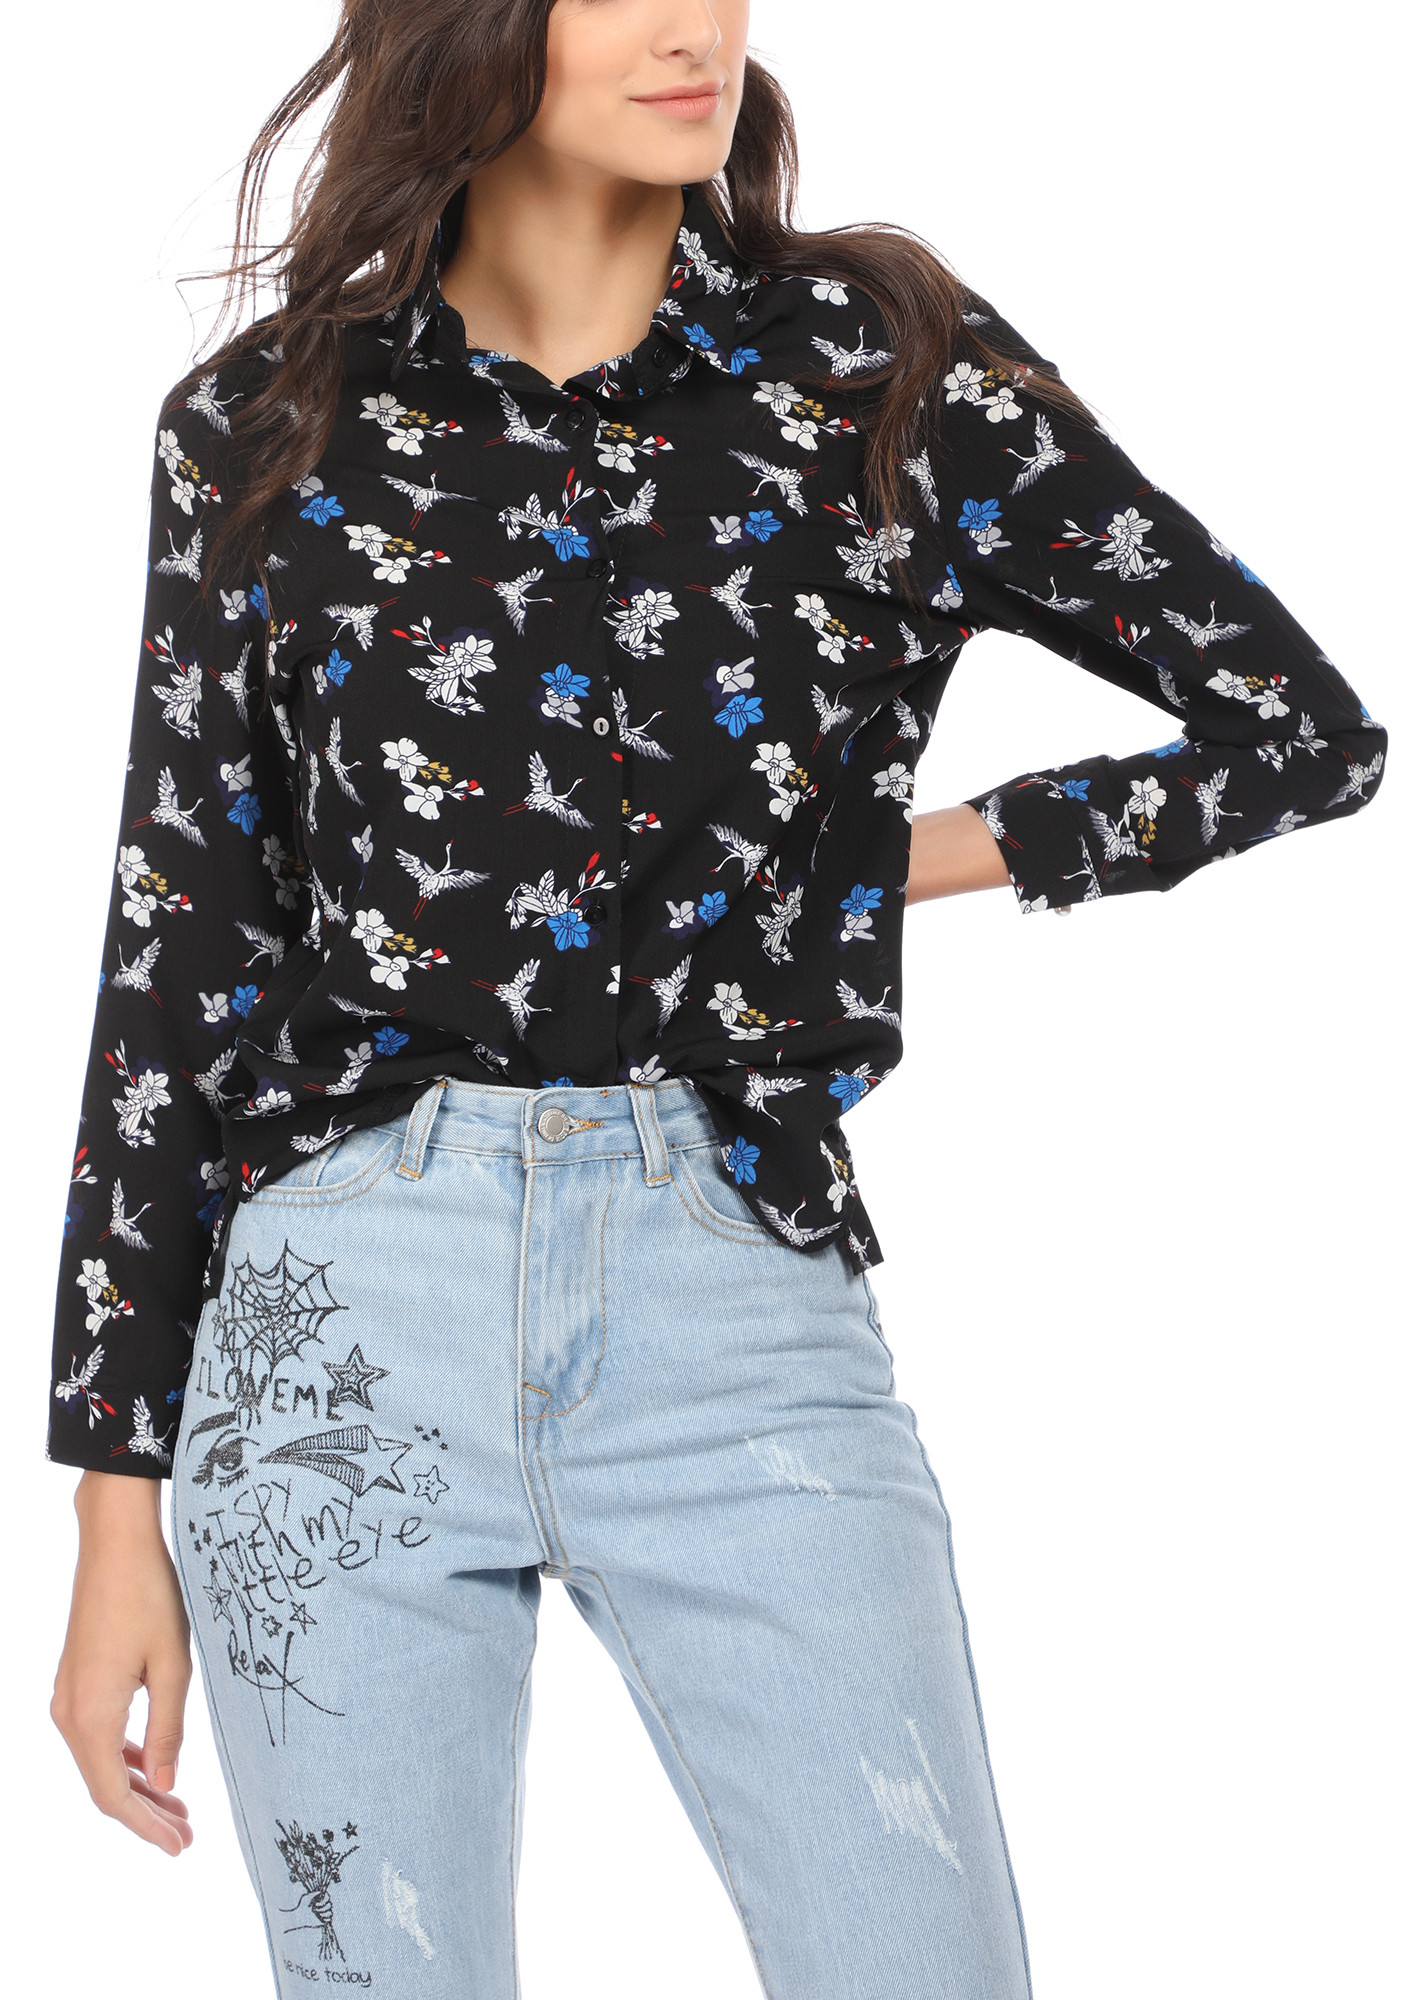 YOUR SWEETEST GO-TO FLORAL BLACK SHIRT